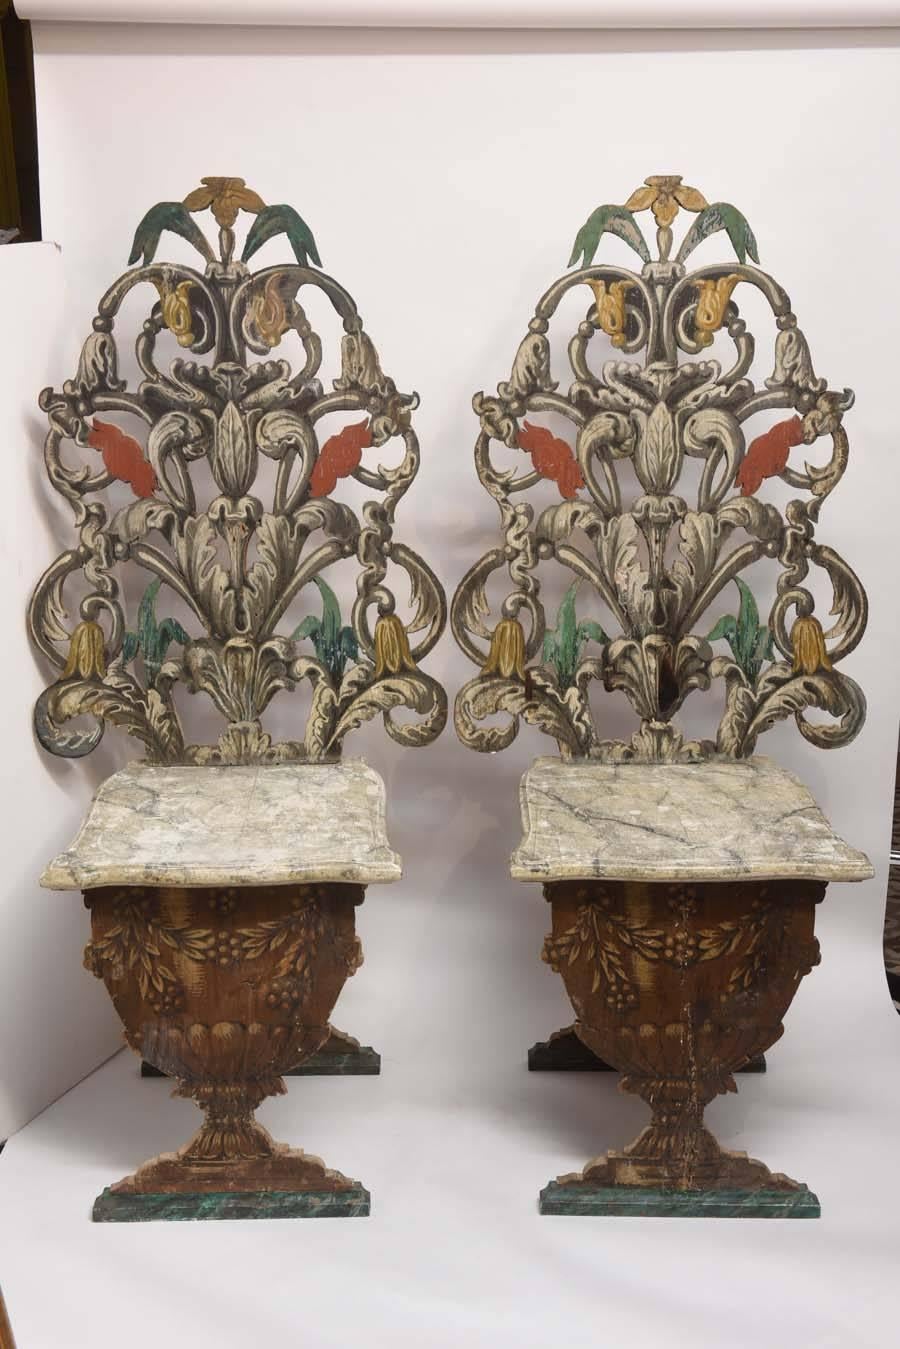 Unique pair of carved and pierced wood side chairs. Beautifully painted by an artisan featuring faux marble seat supported by a garden urn.